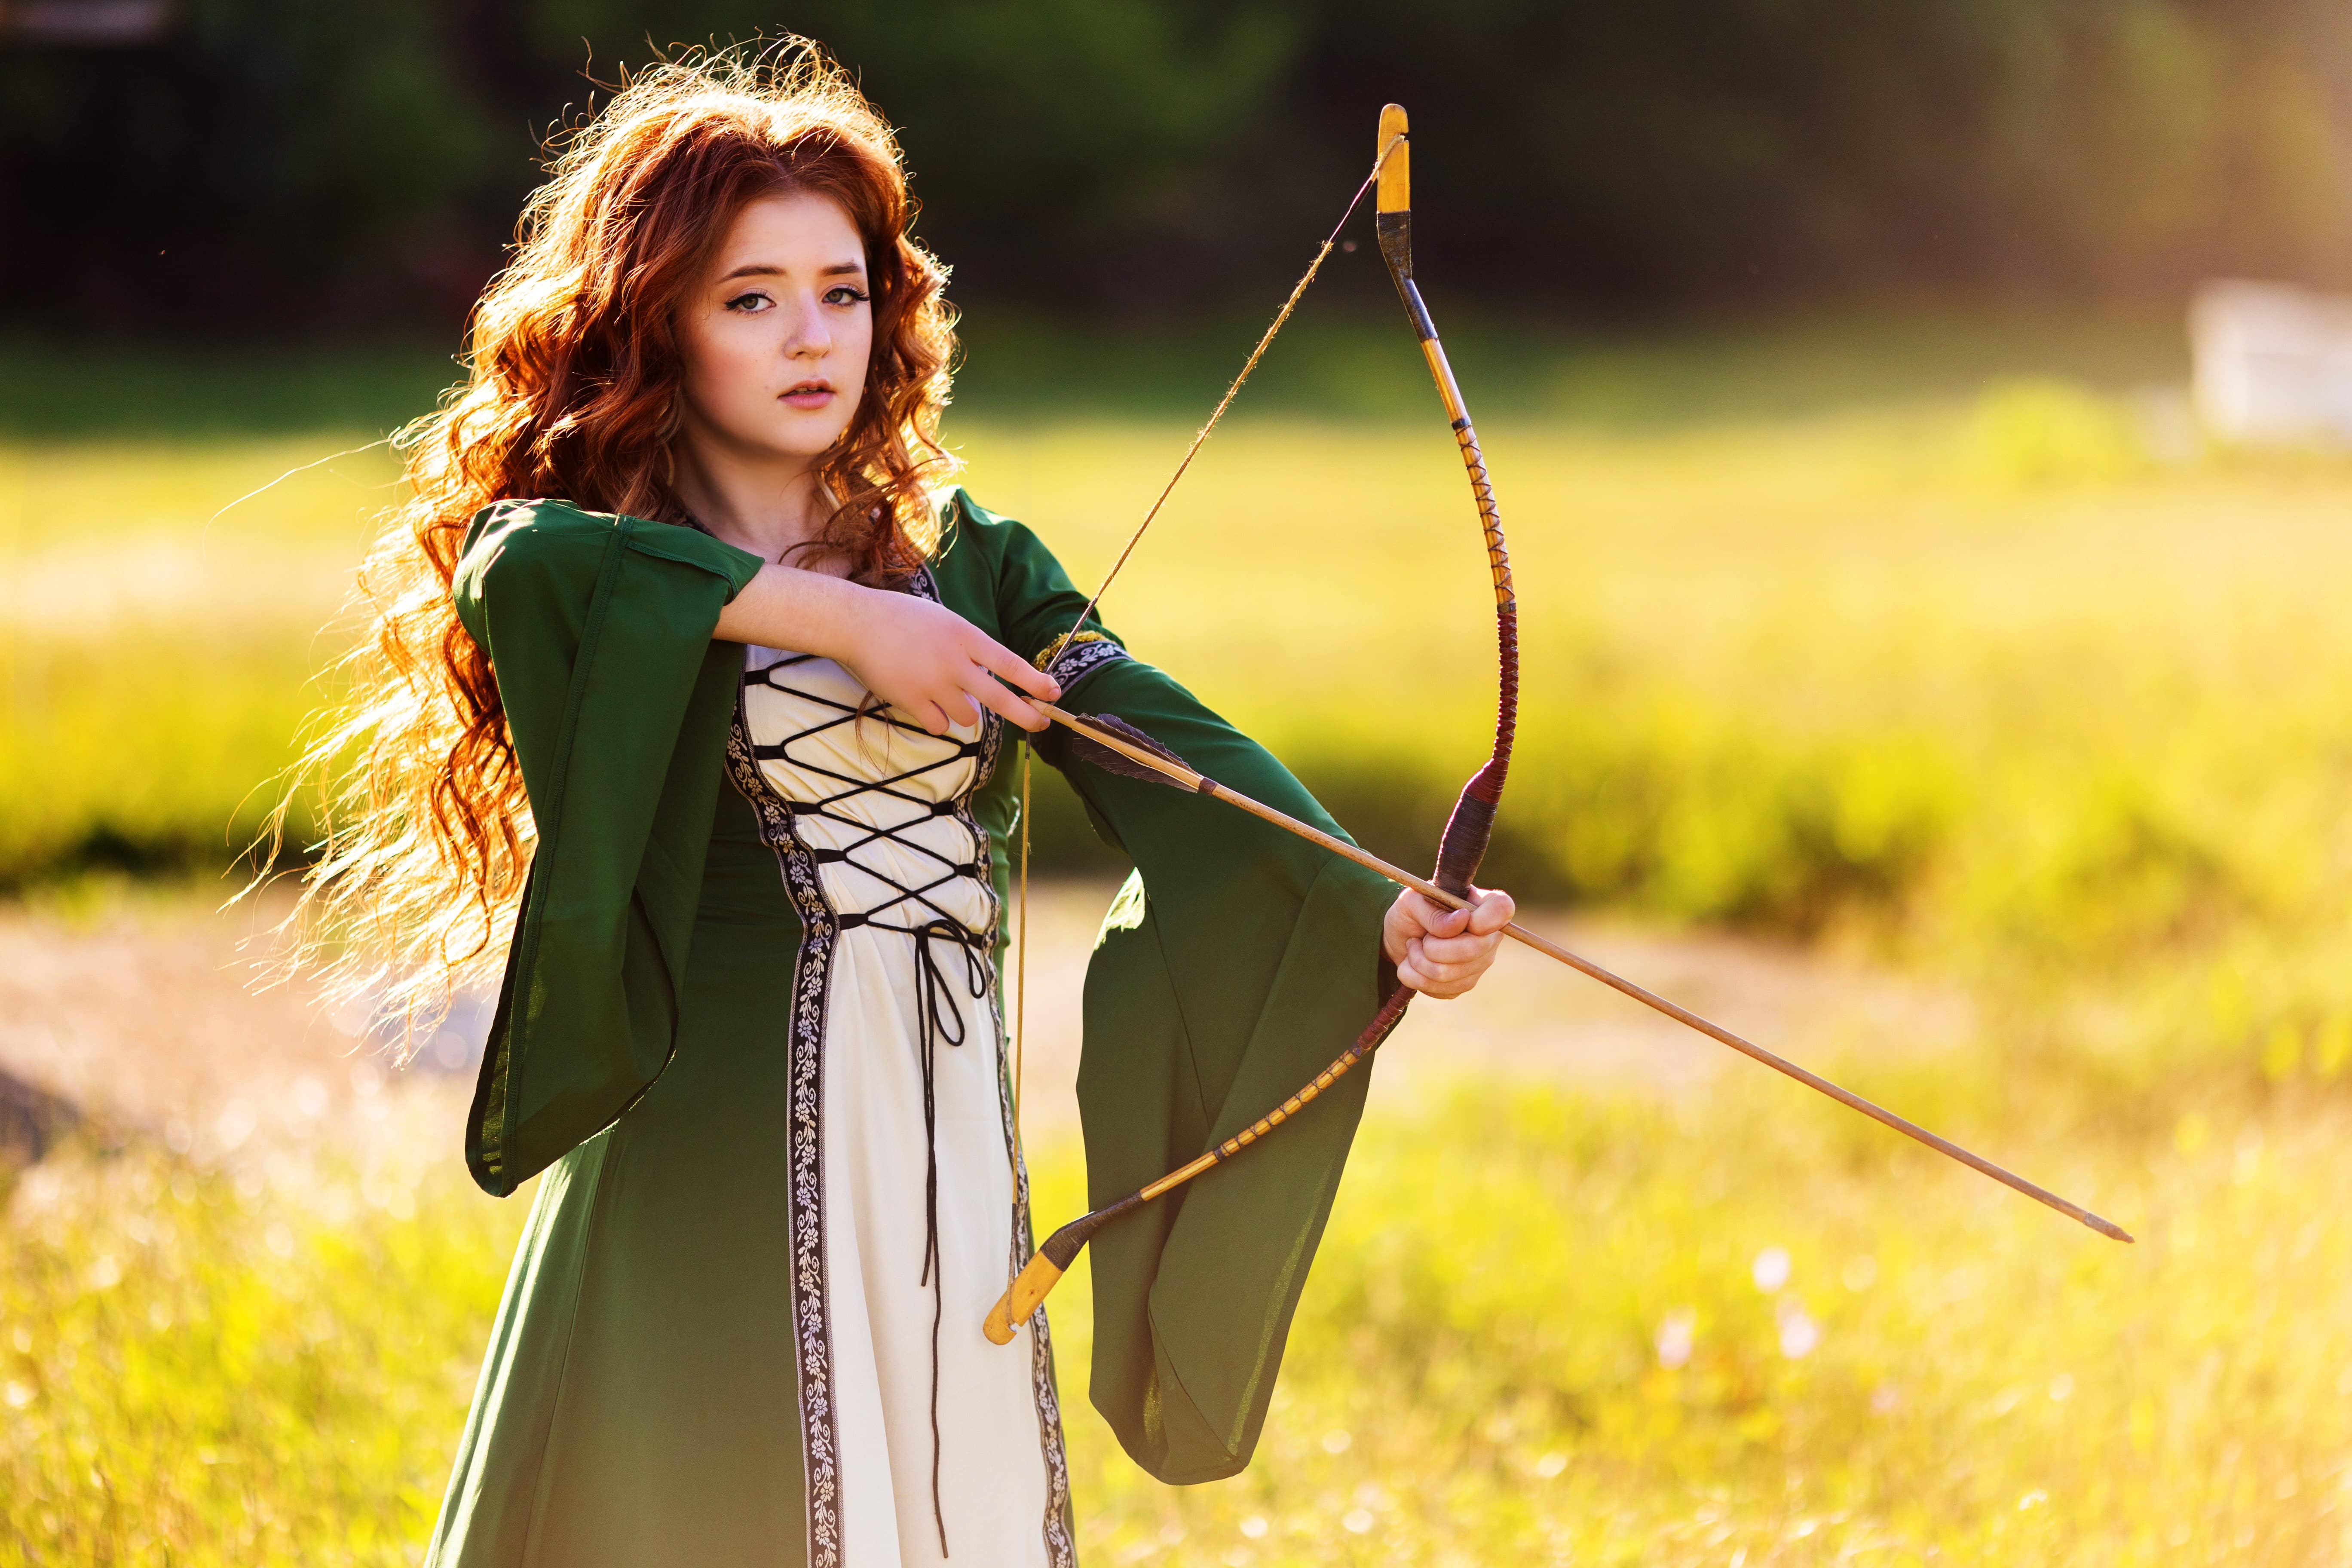 mysterious red-haired warrior girl stands. Lady elven princess holds bow and arrow. Long medieval dress Blue cloak cape.